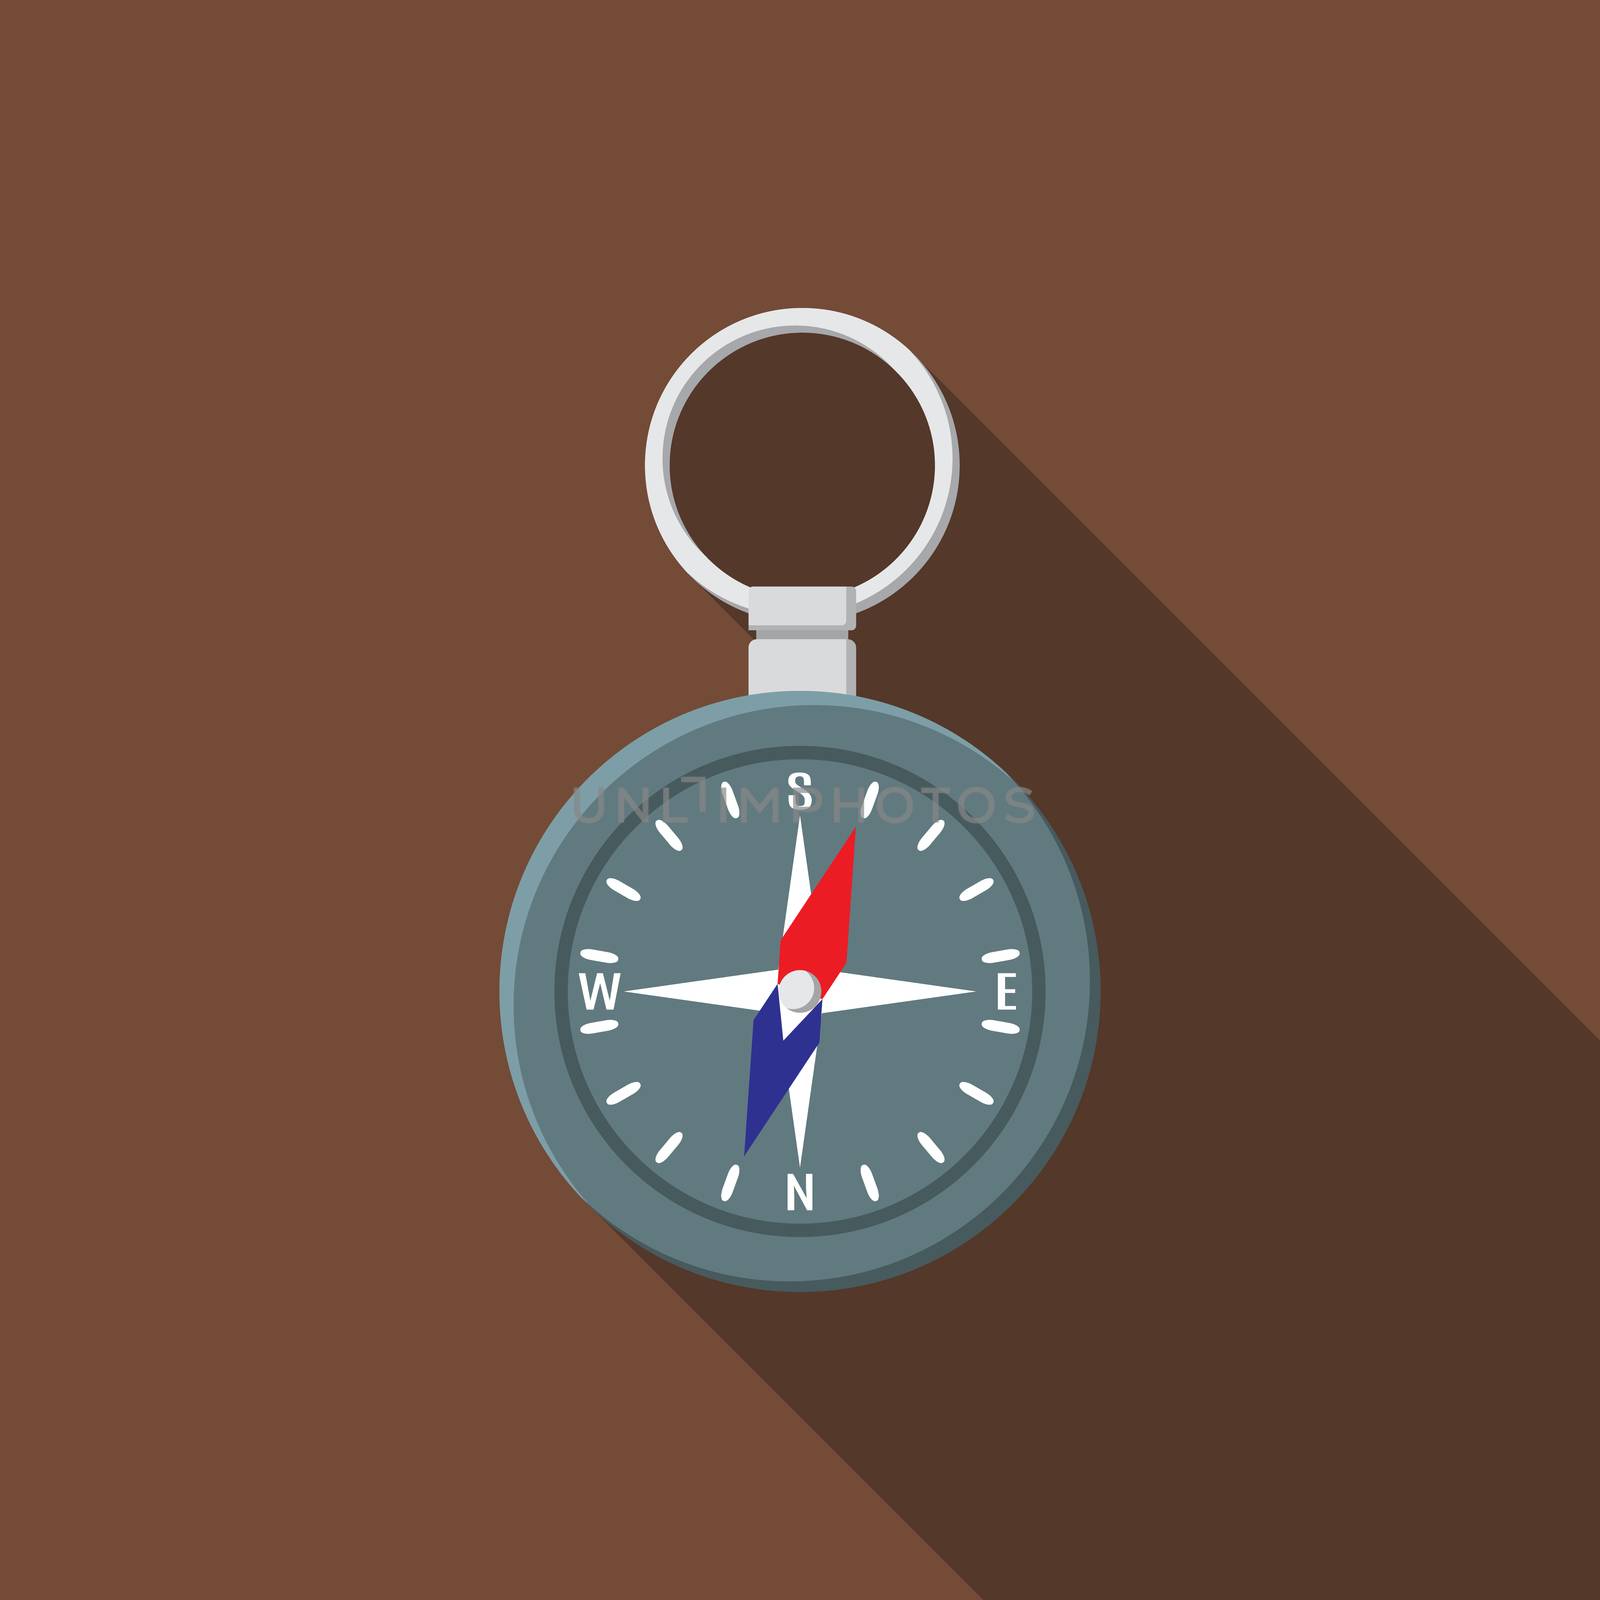 Flat design modern vector illustration of compass icon, camping, hiking and exploring equipment with long shadow.